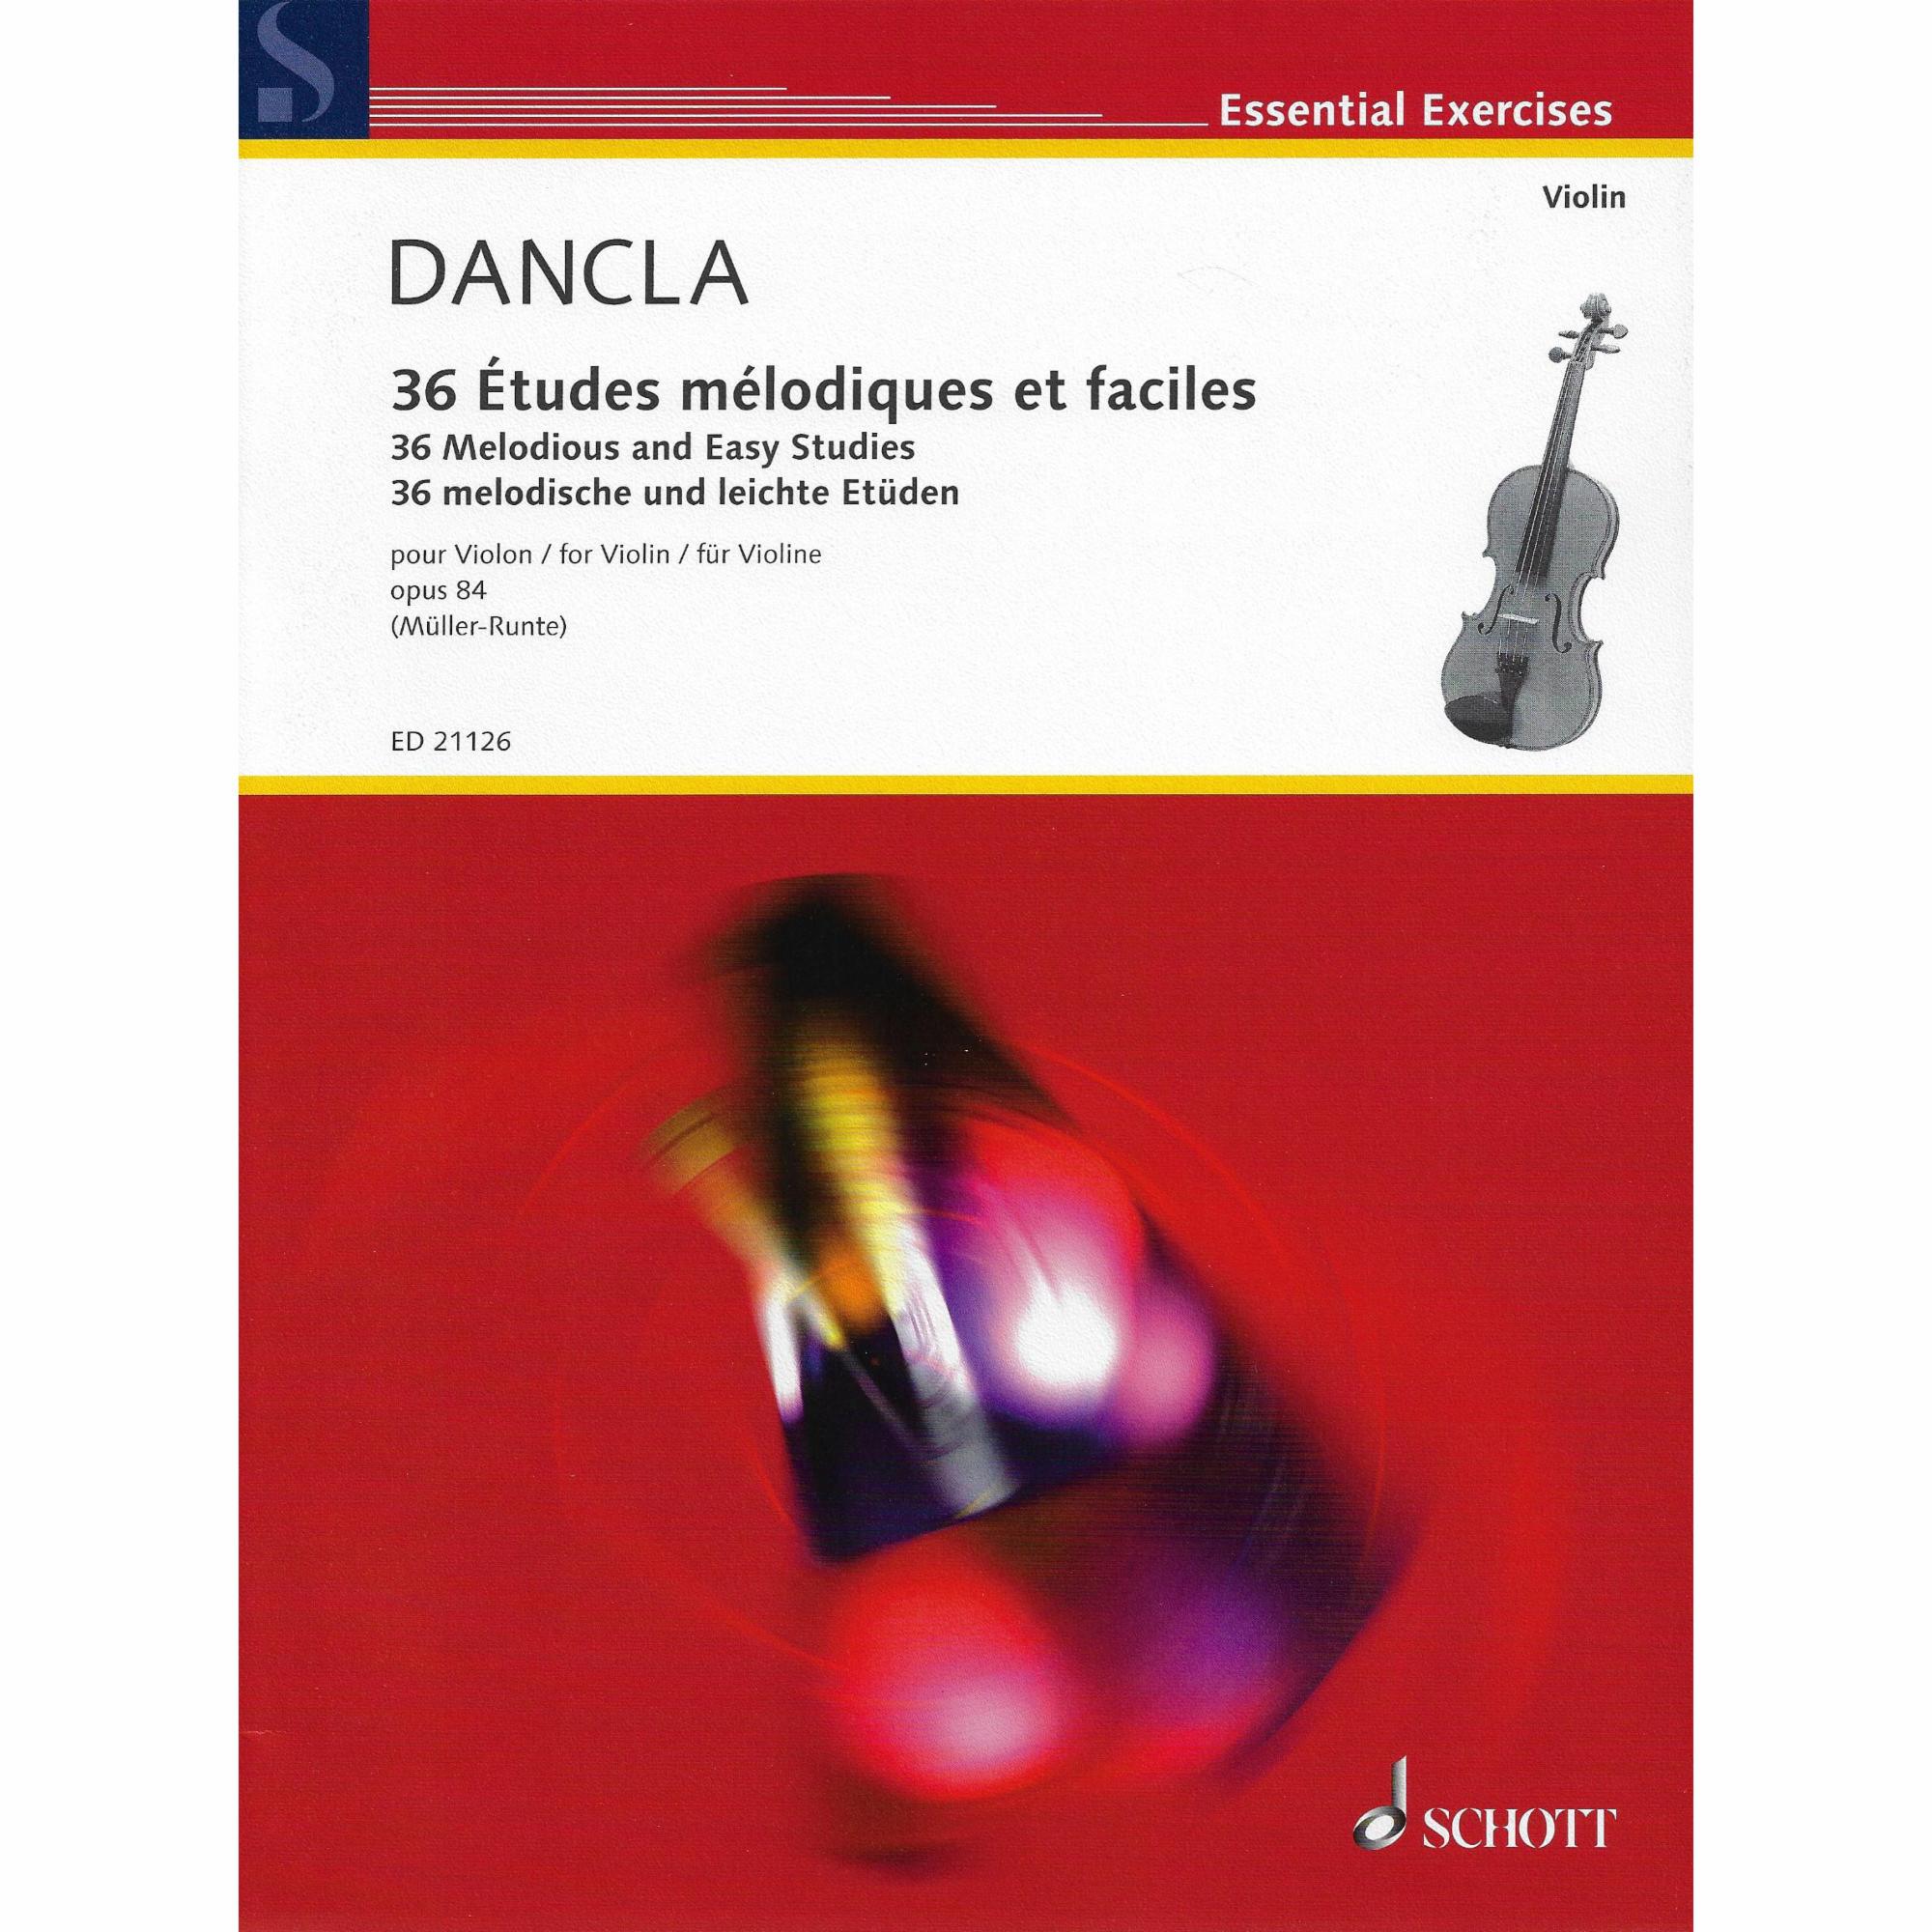 Dancla -- 36 Melodious and Easy Studies, Op. 84 for Violin